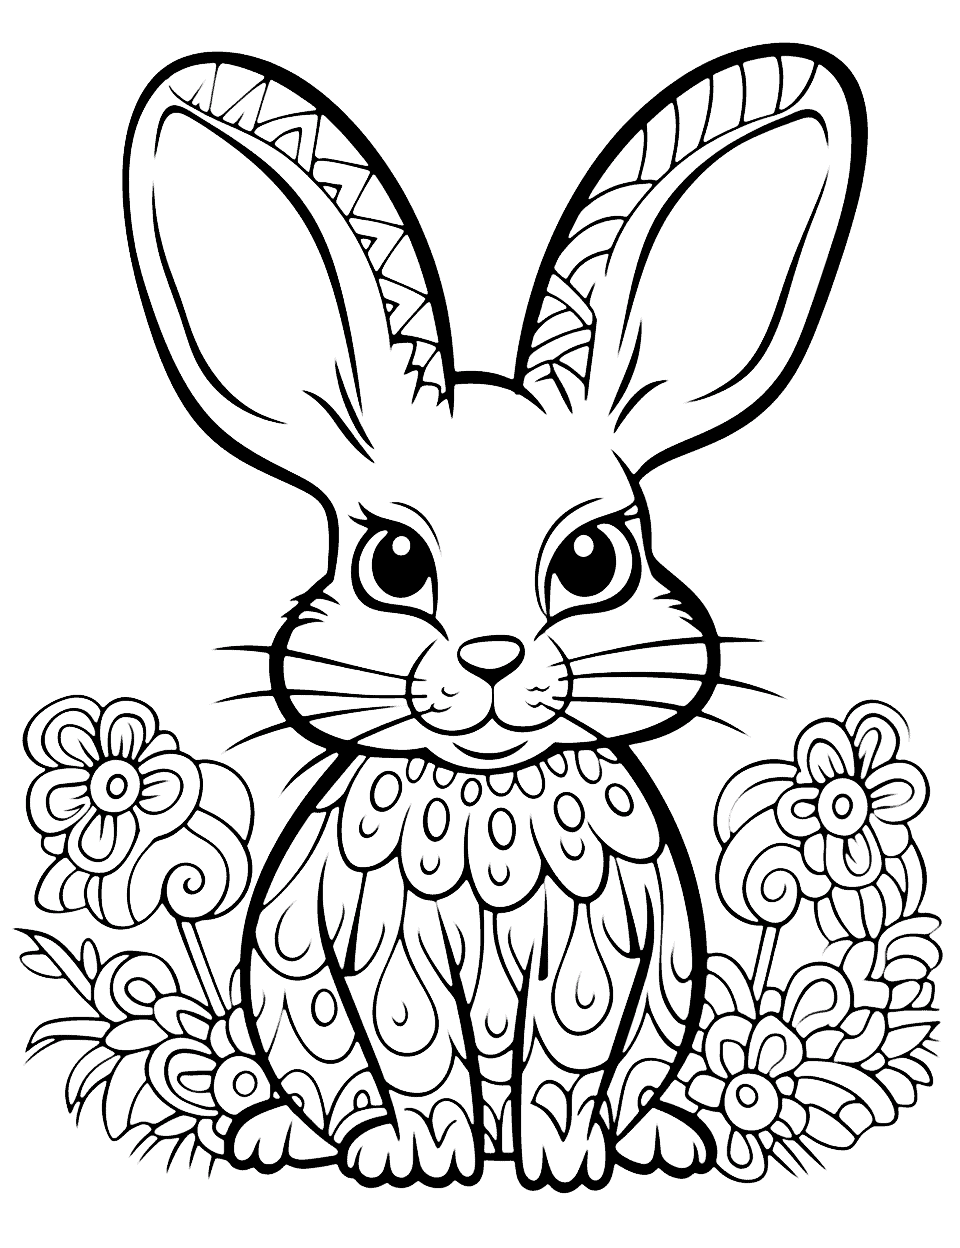 Zentangle Patterns with Bunny Coloring Page - The form of a bunny filled by intricate zentangle designs.